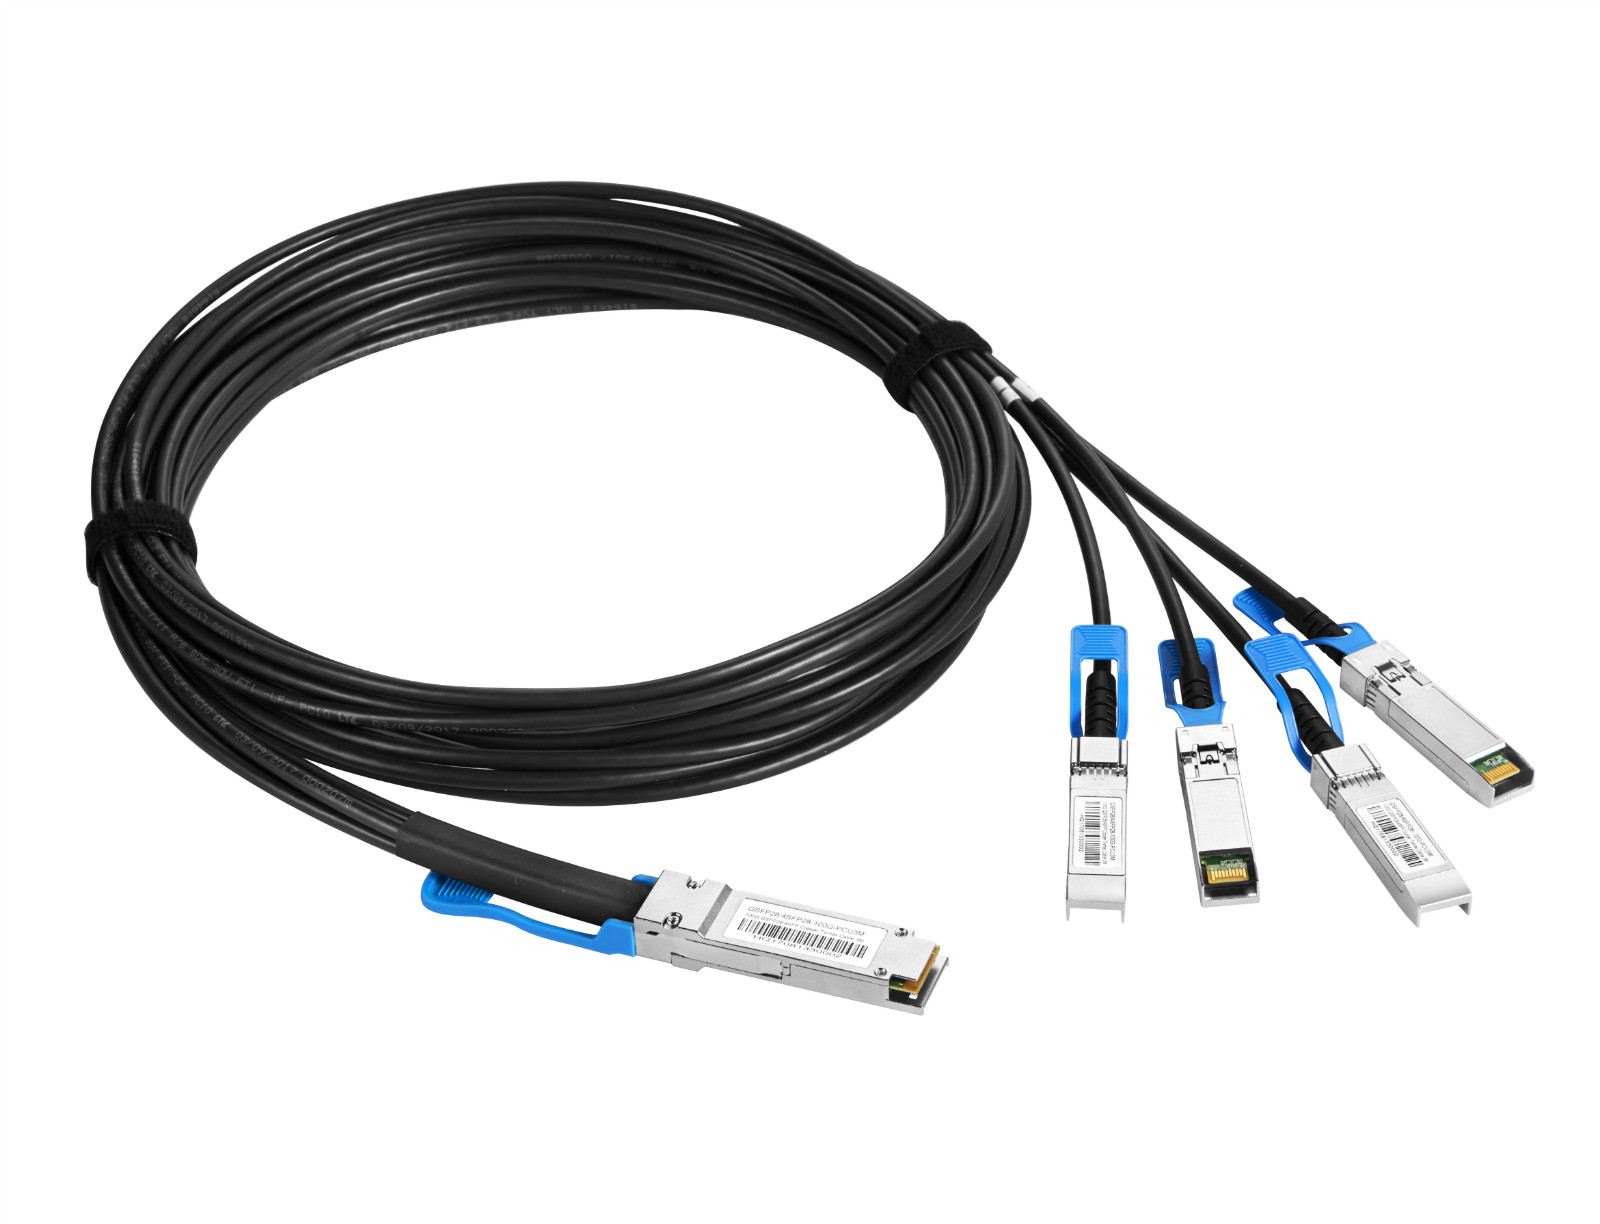 DAC  Cables, no better, only more professional